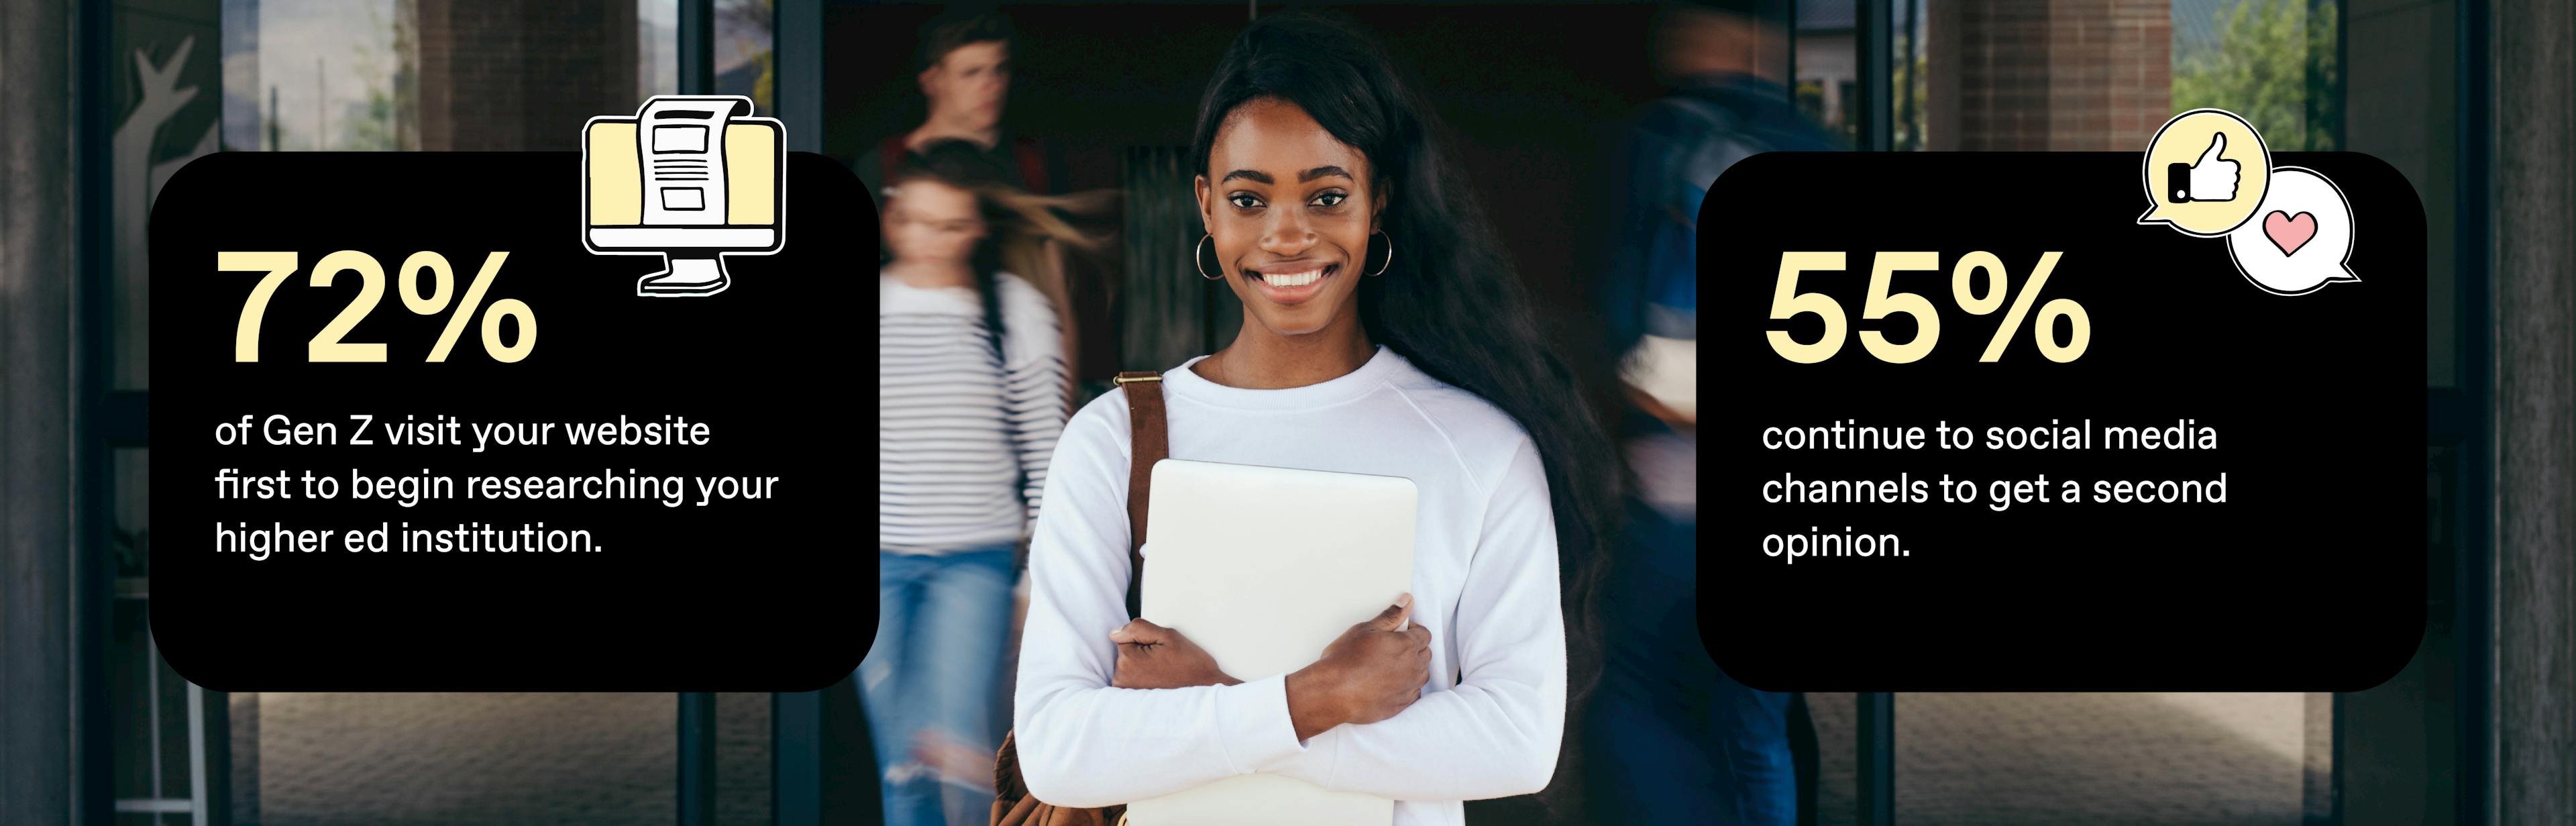 smiling student holding books with text overlays "72% of prospective students visit your website when conducting initial research on your higher ed institution" and "55% continue to social media channels to get a second opinion"